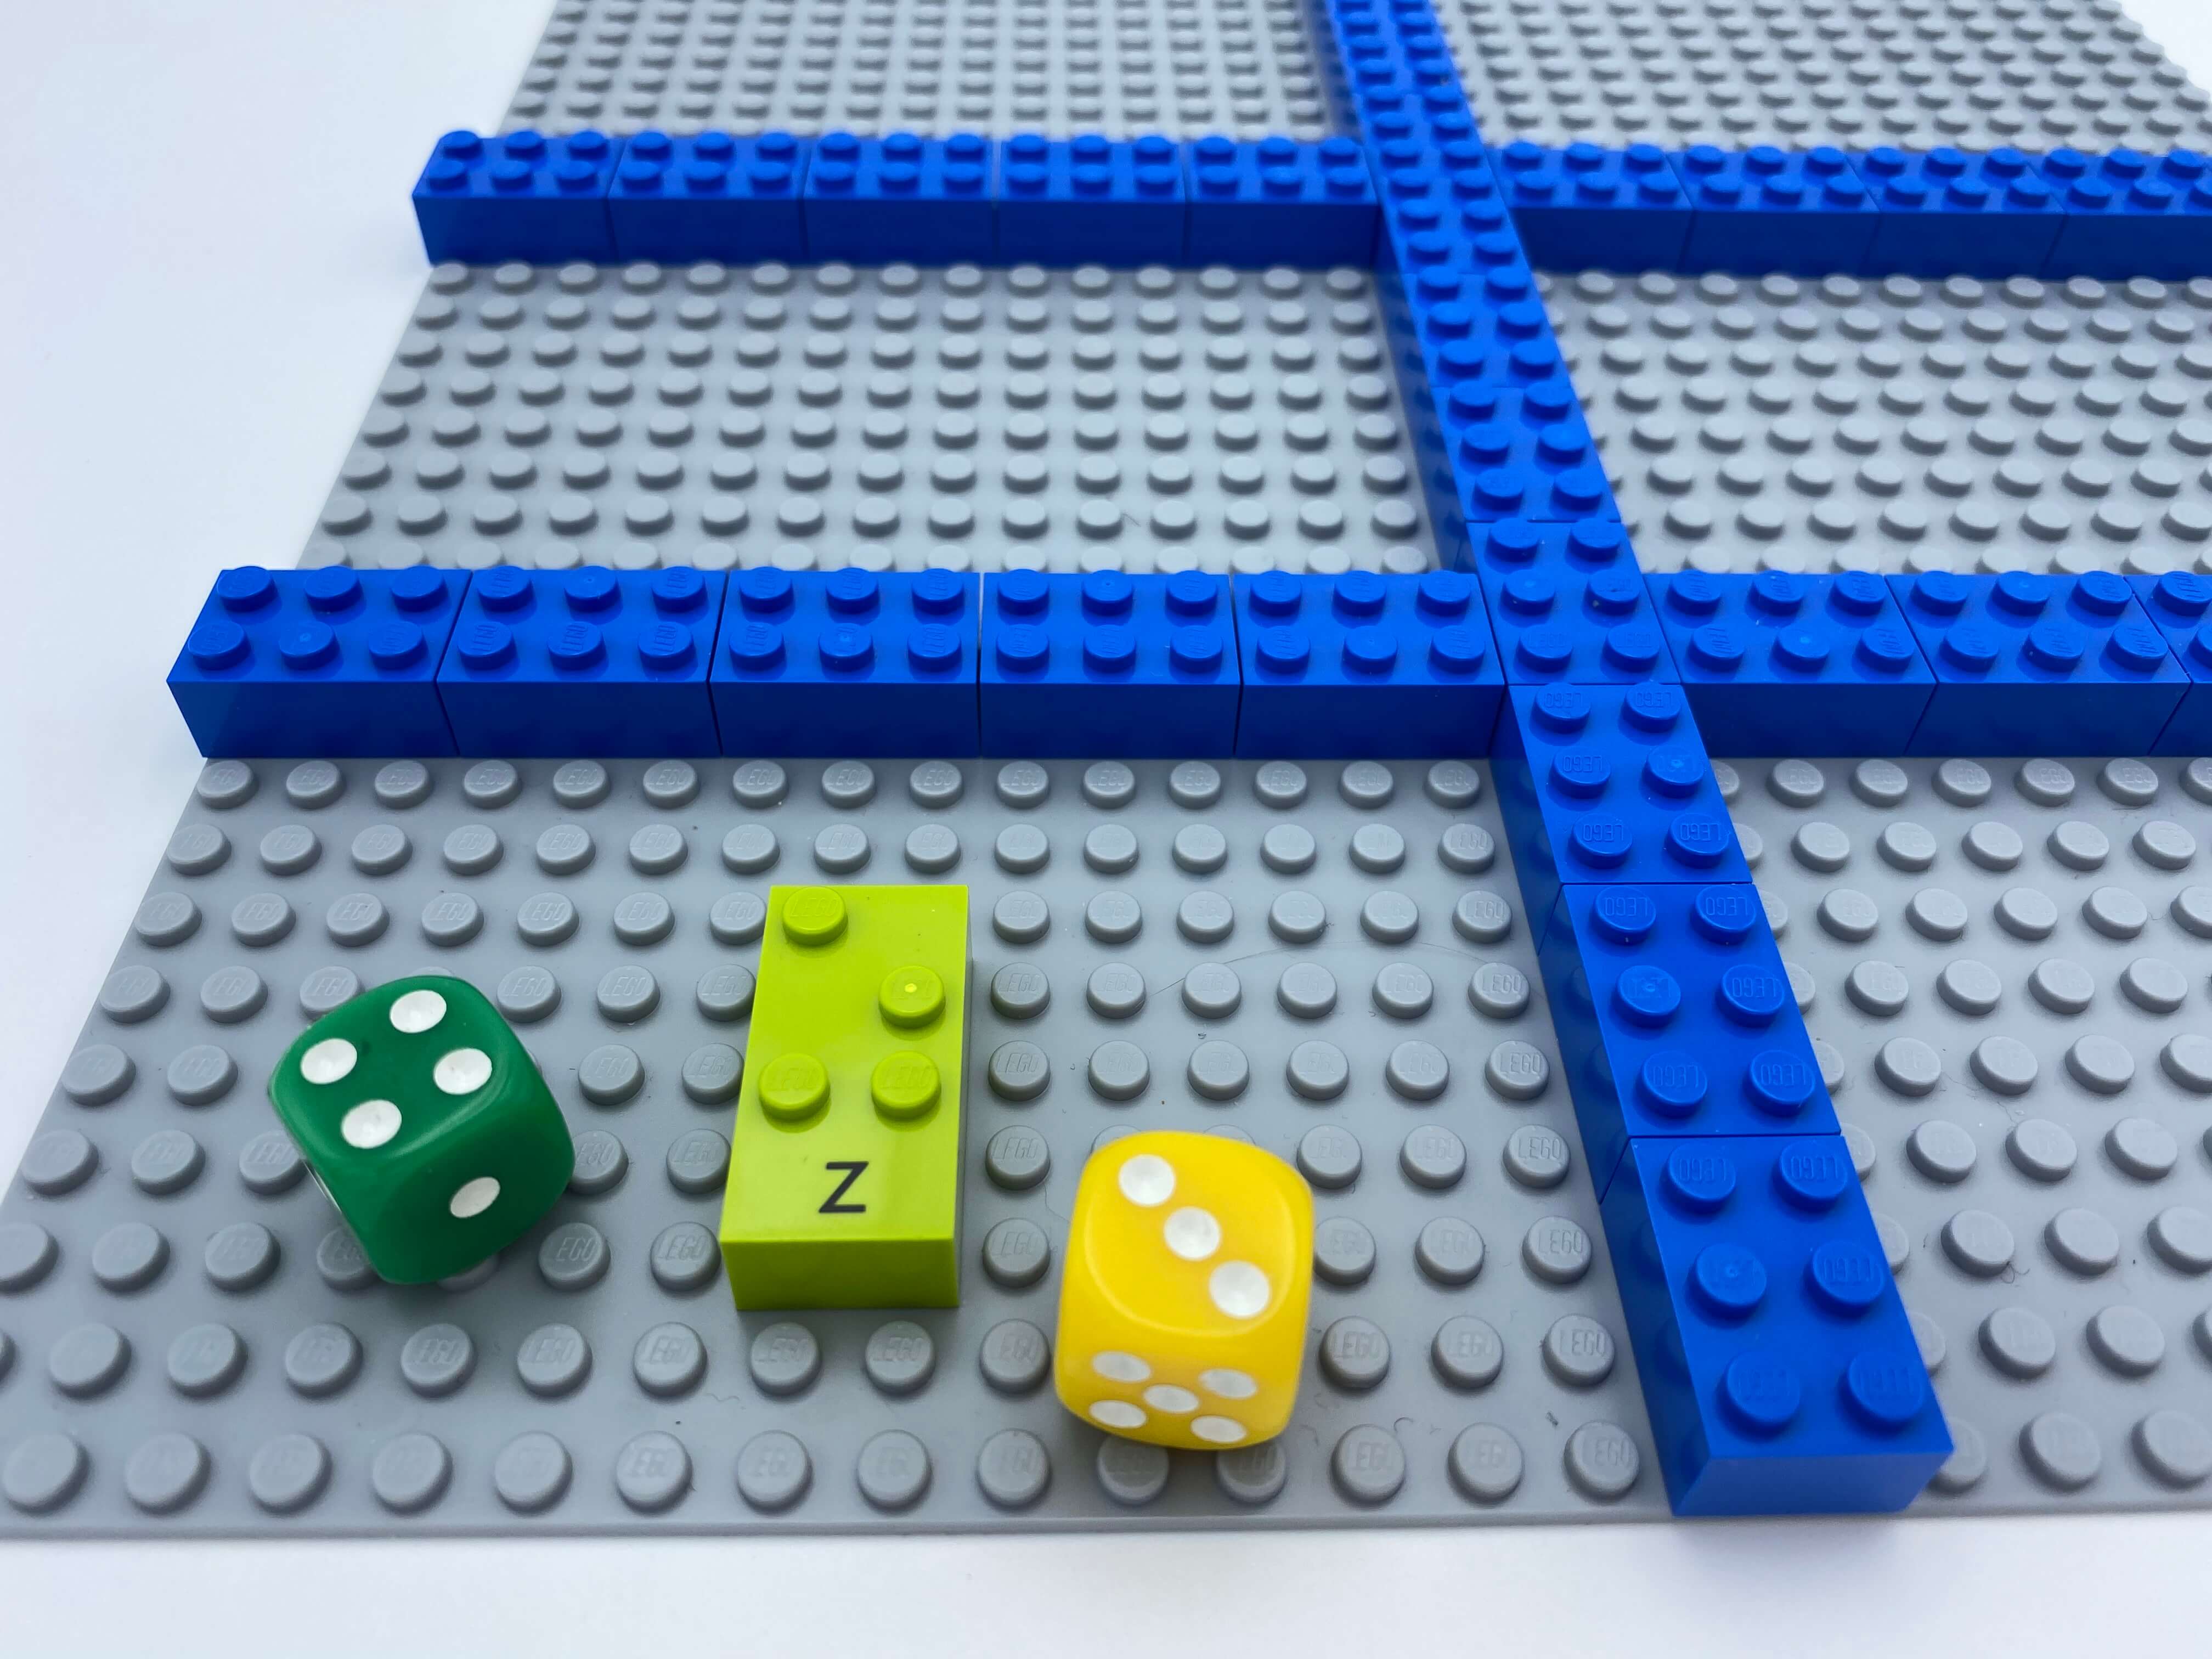 Sections made by classic LEGO bricks, 2 dice, 1 letter brick z on the base plate.